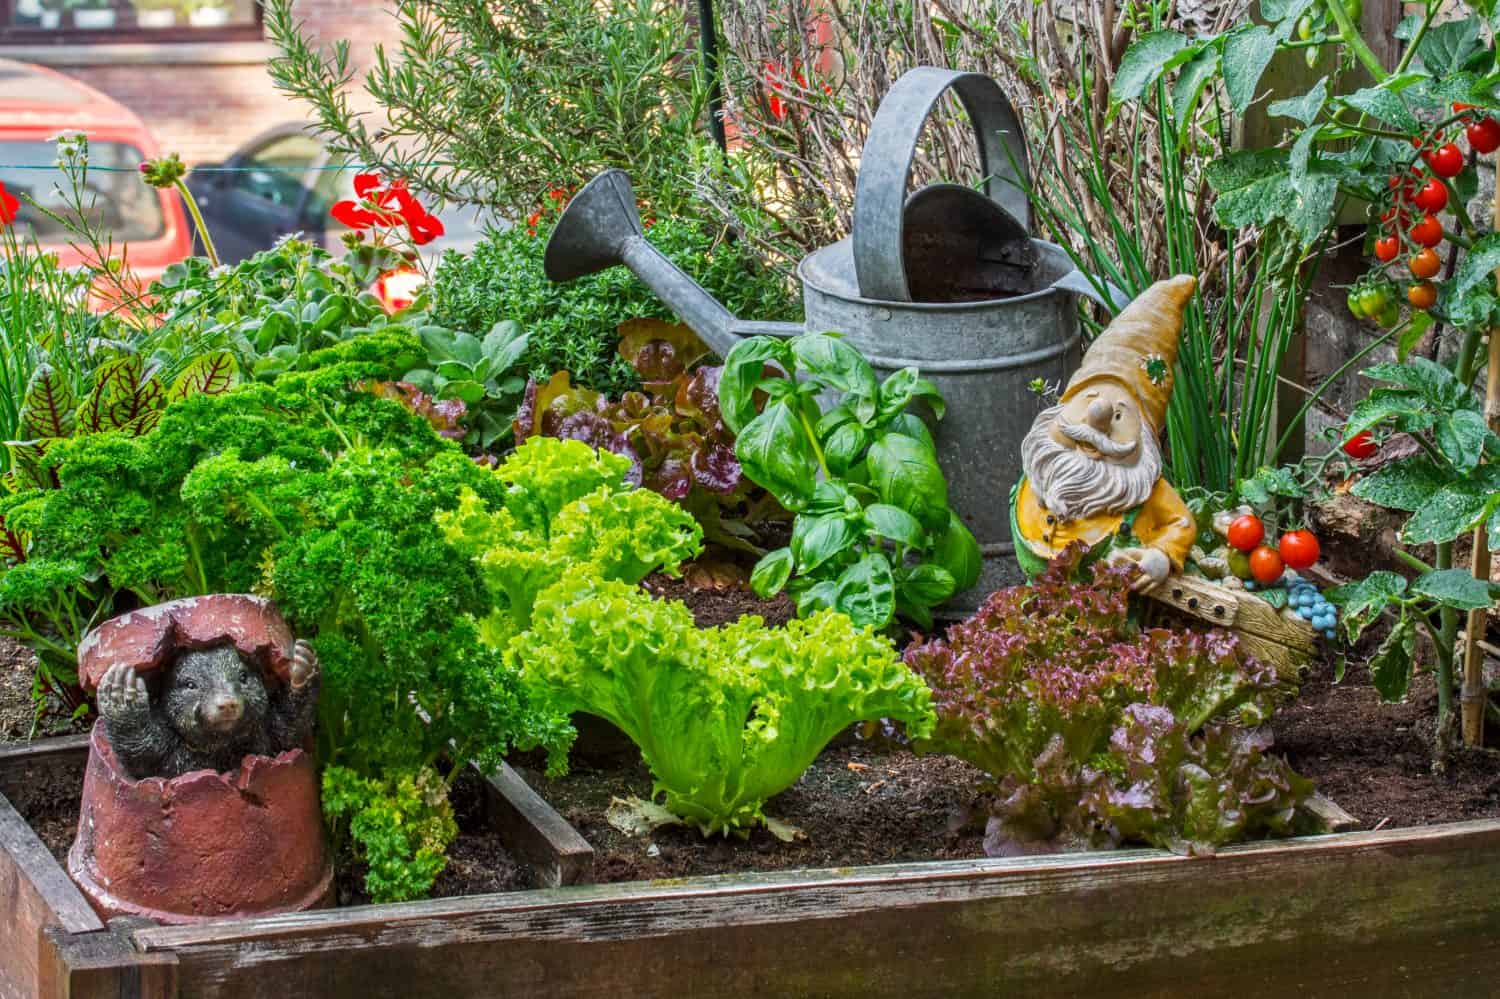 Garden gnome ornament figurine among different species of lettuce, herbs, tomatoes and greens in wooden box of raised square foot garden on balcony